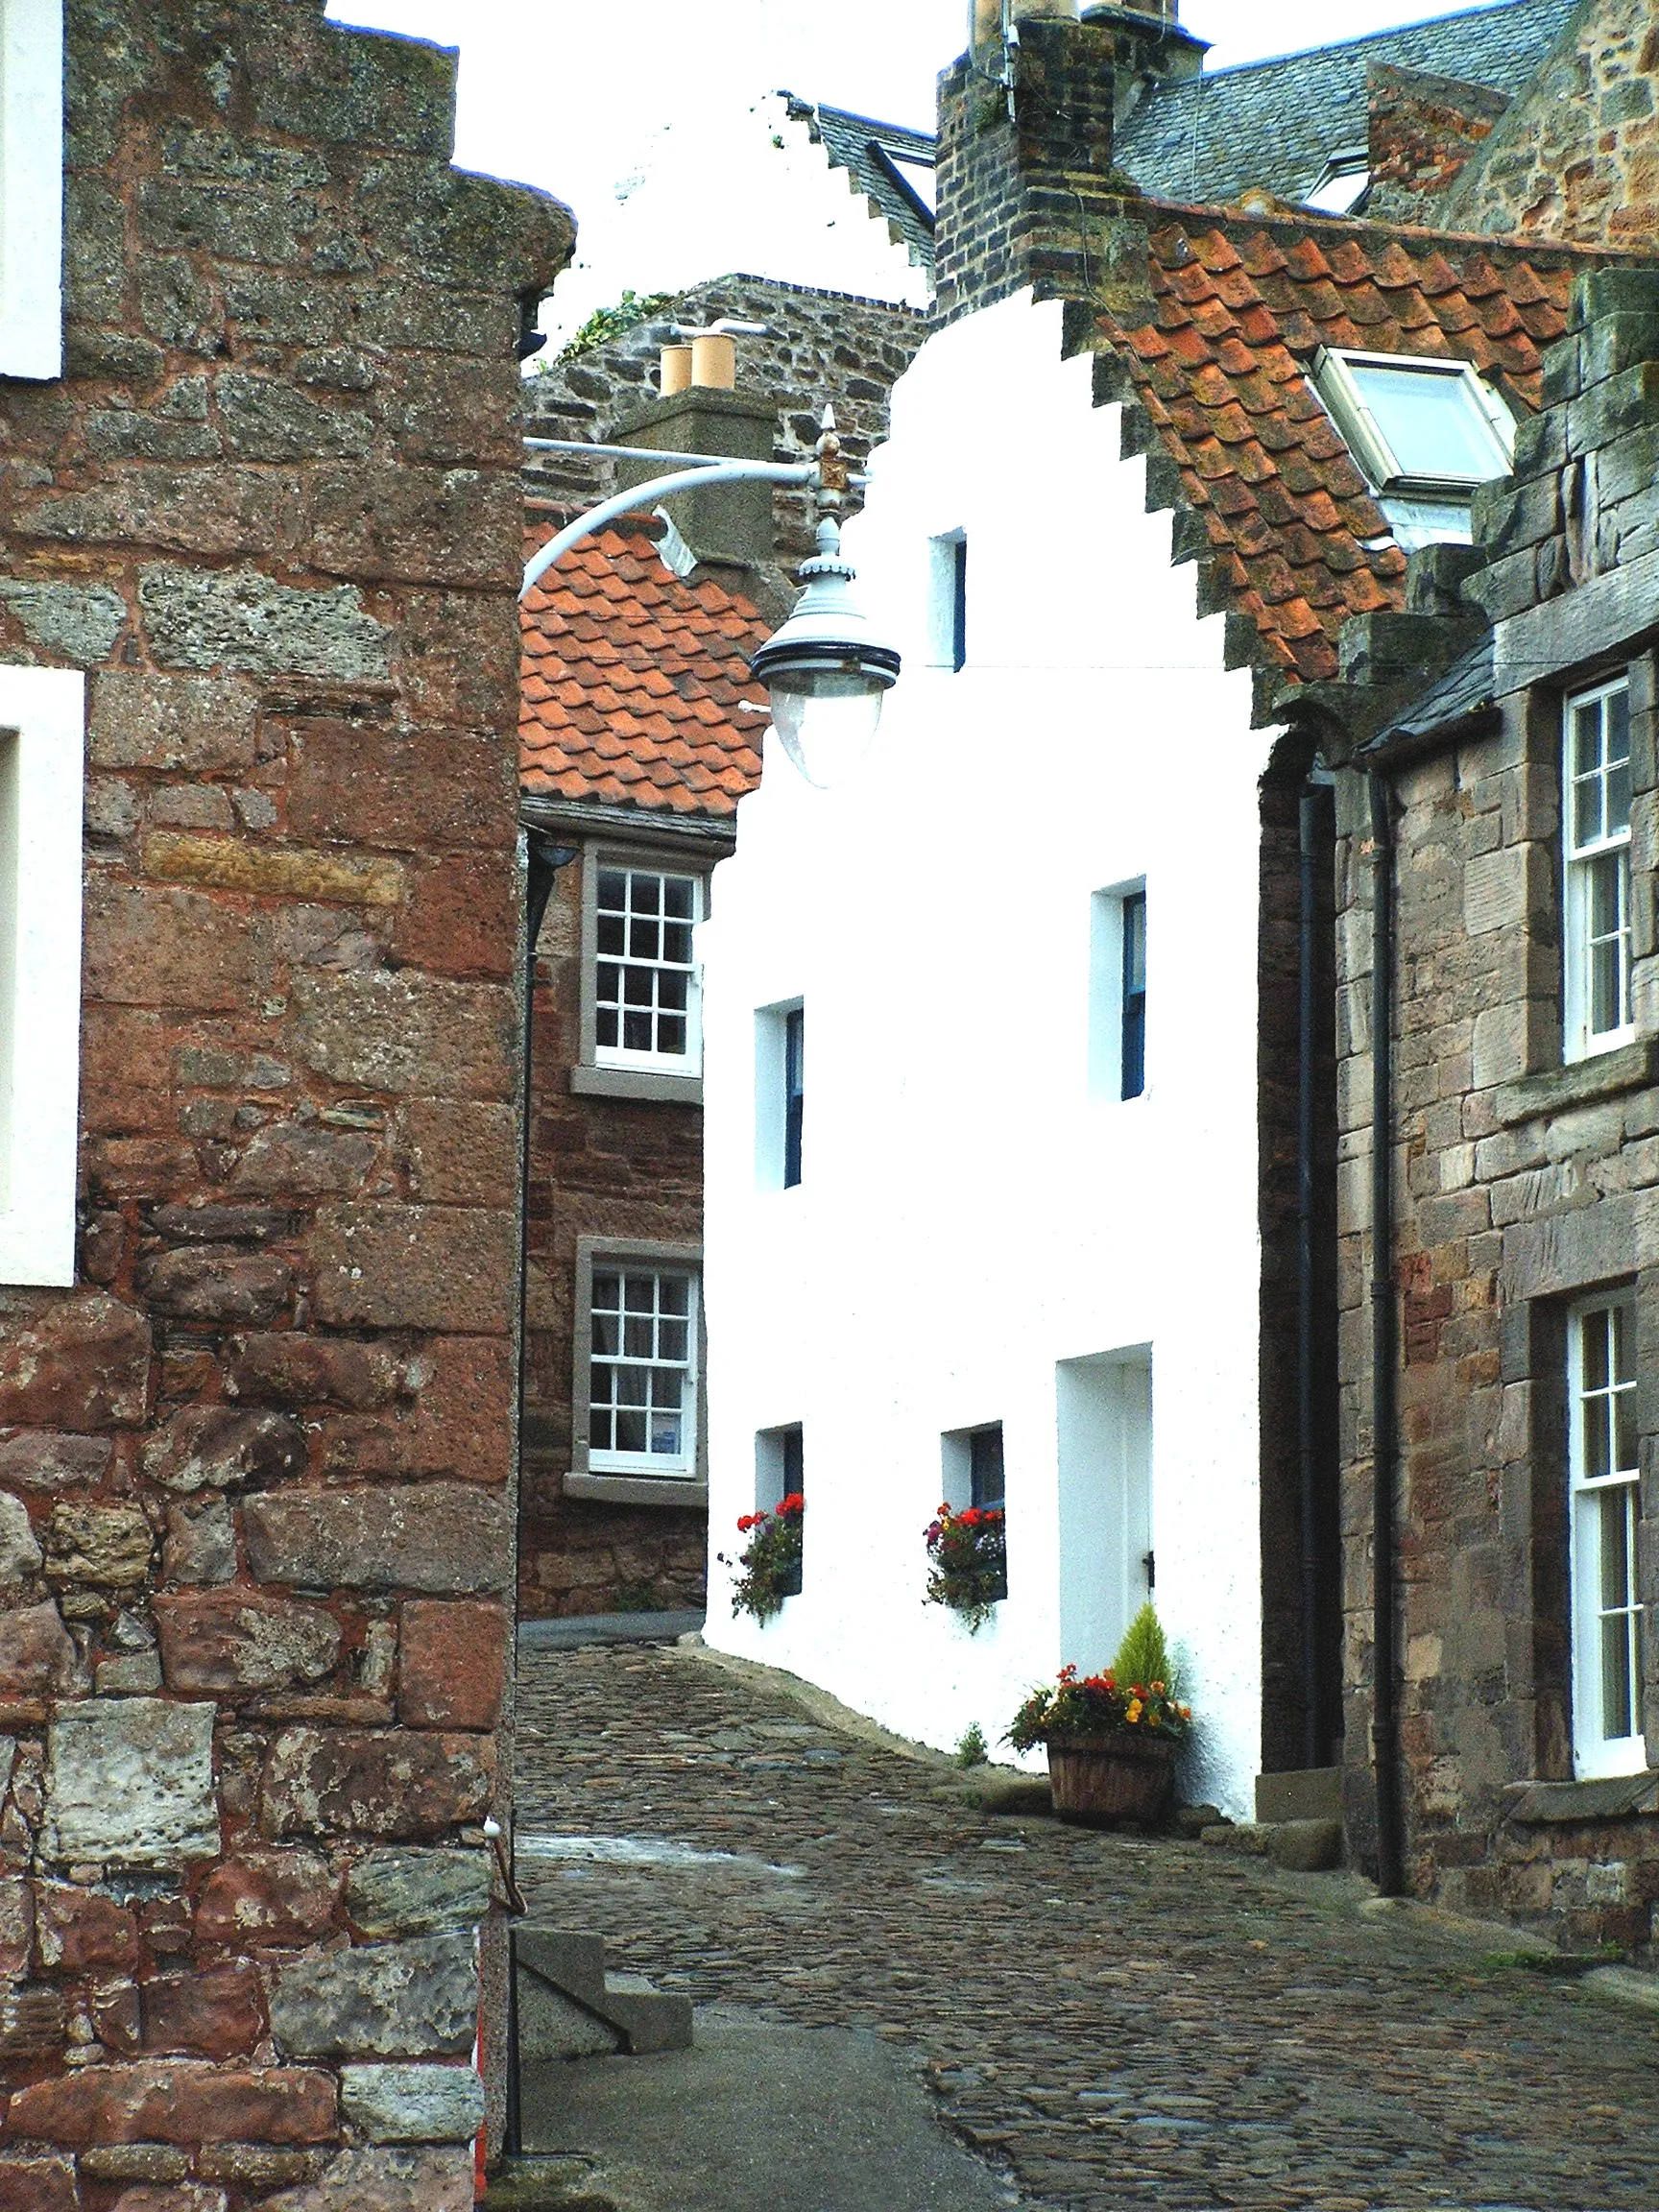 Photo showing: A lane in Crail, Fife, Scotland